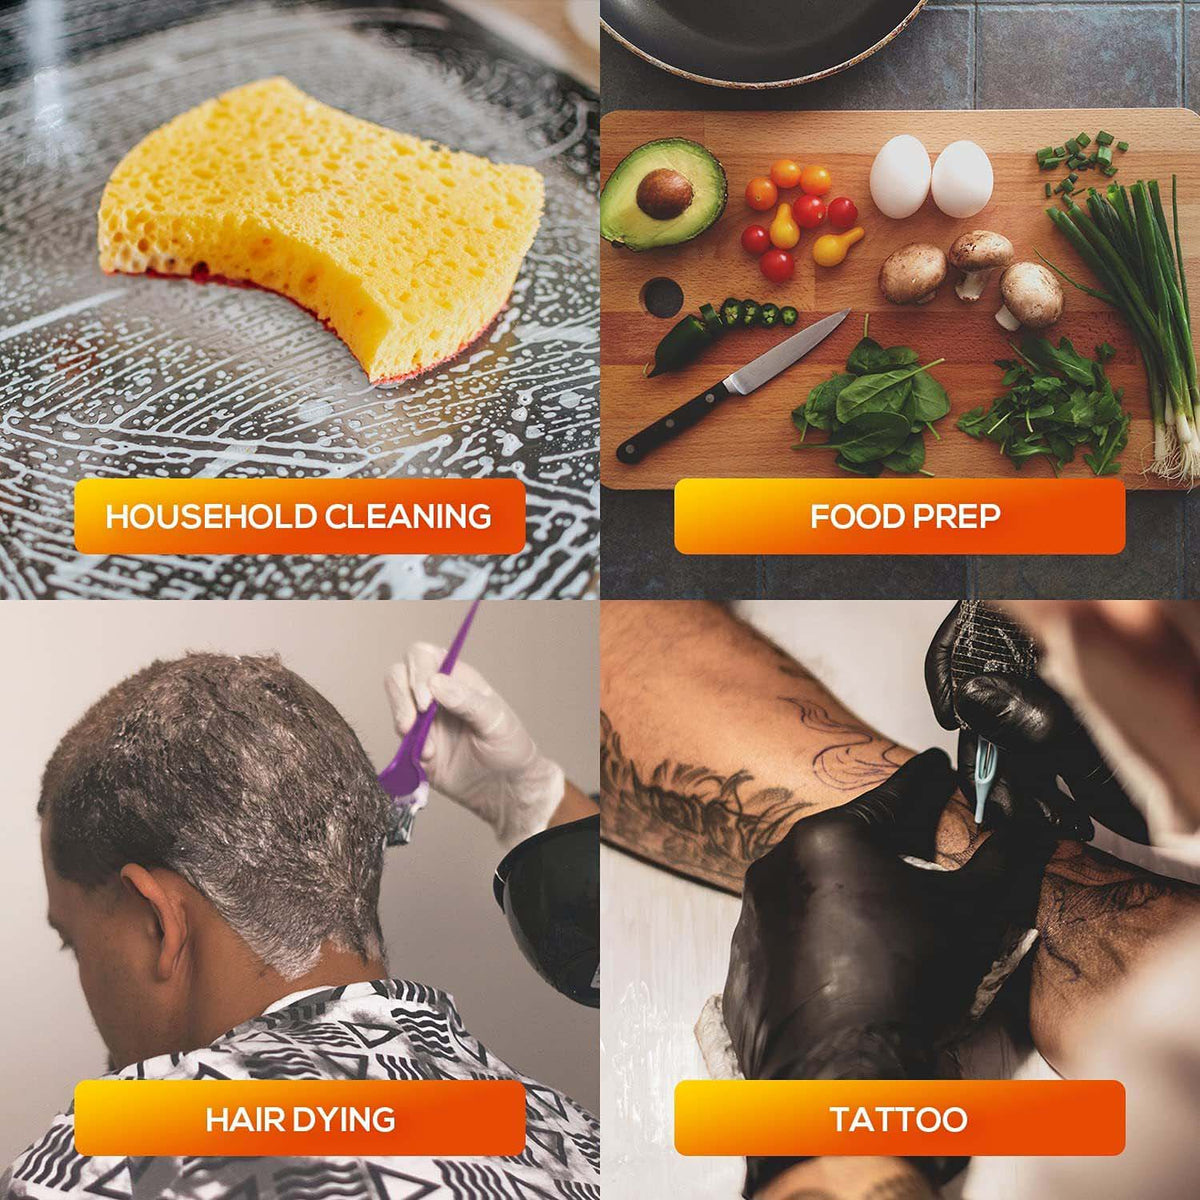 different uses for HandCare Black Vinyl Gloves like cleaning, preparing food, hair dying, and doing tattoo